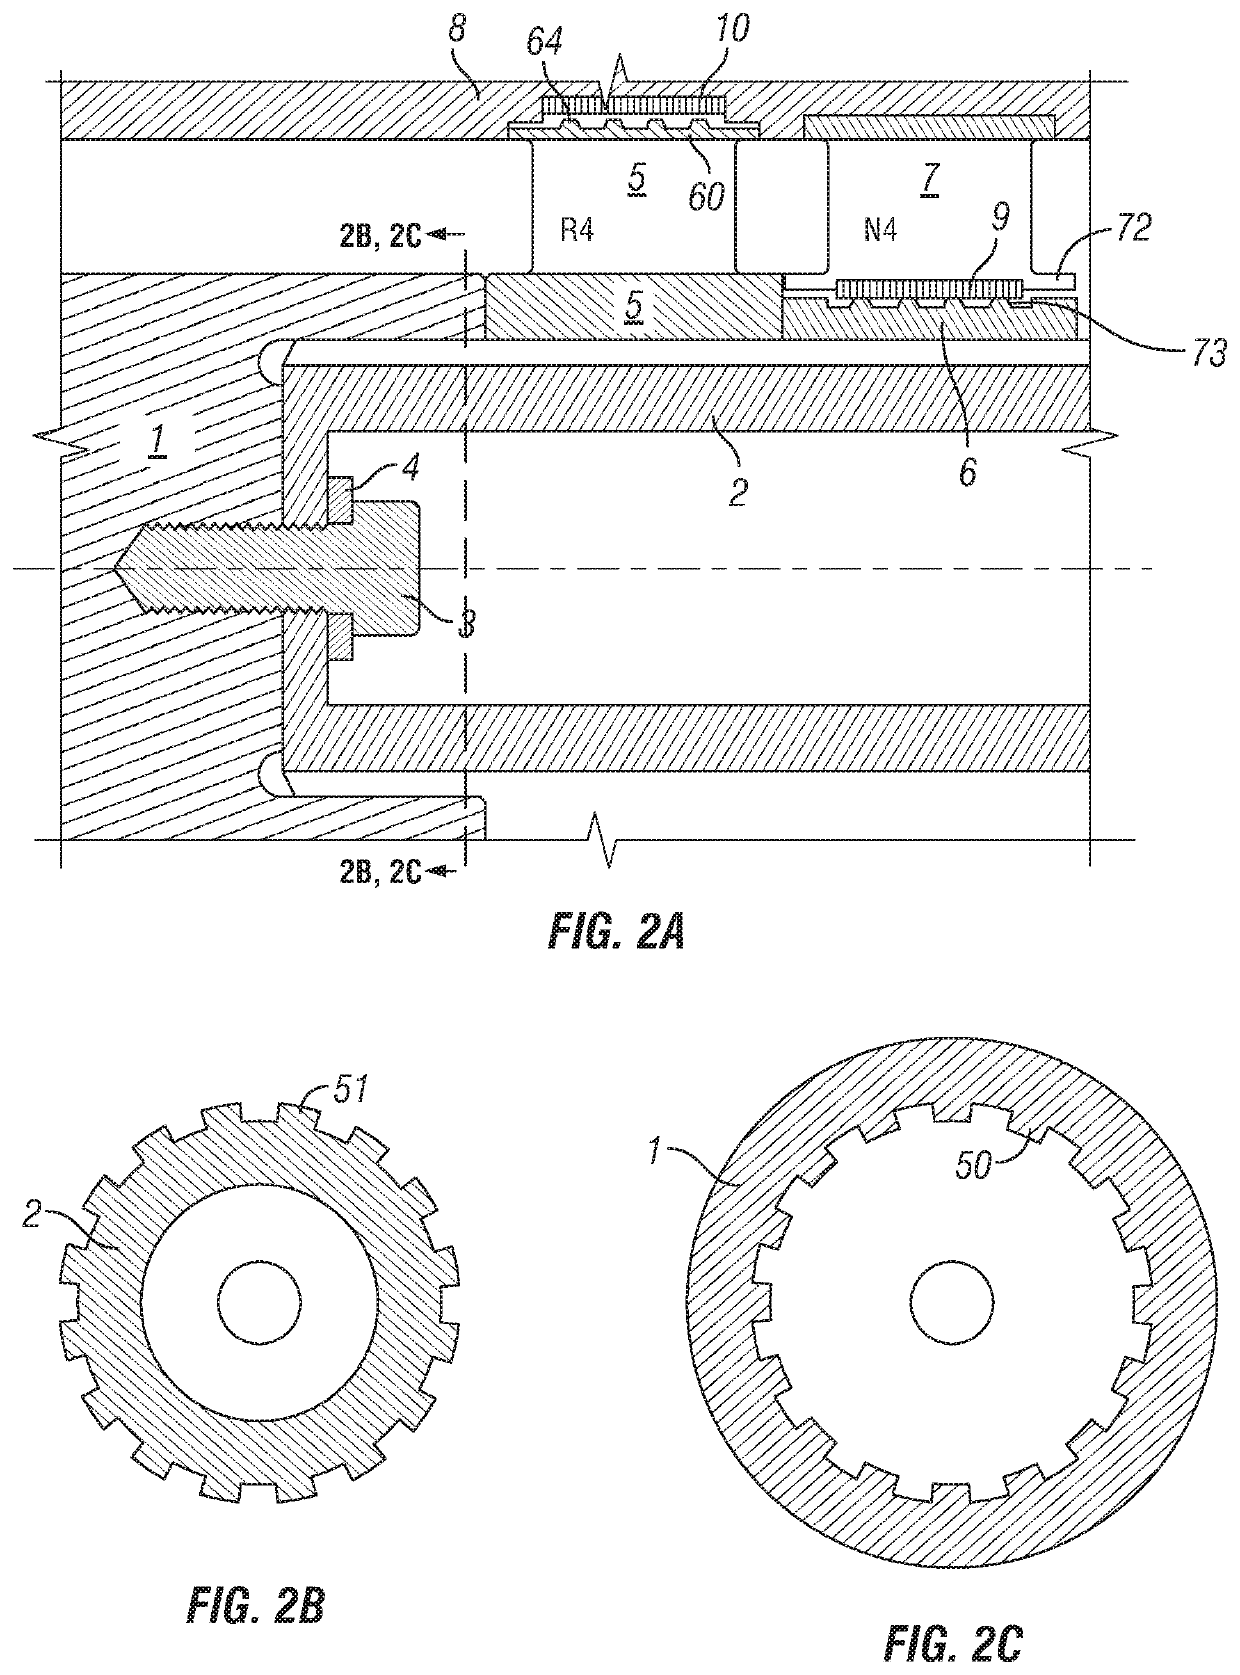 Compact Axial Turbine for High Density Working Fluid